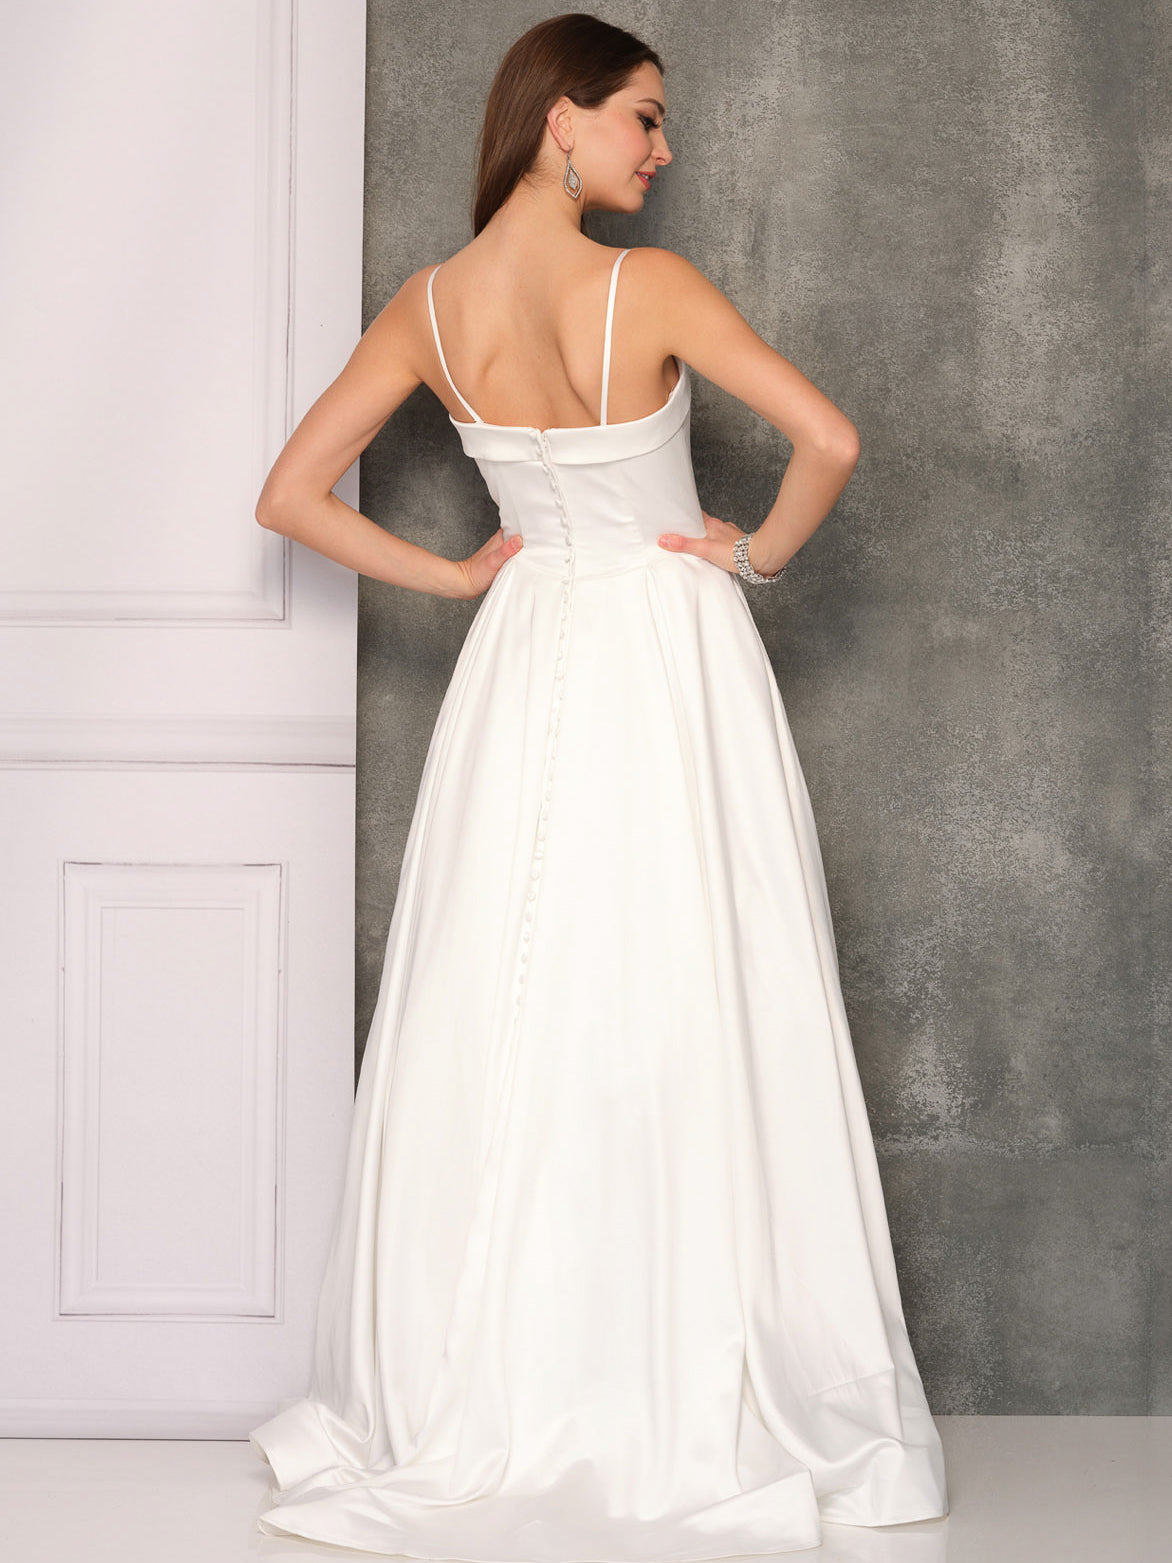 FOLDED SWEETHEART BUTTON WEDDING GOWN